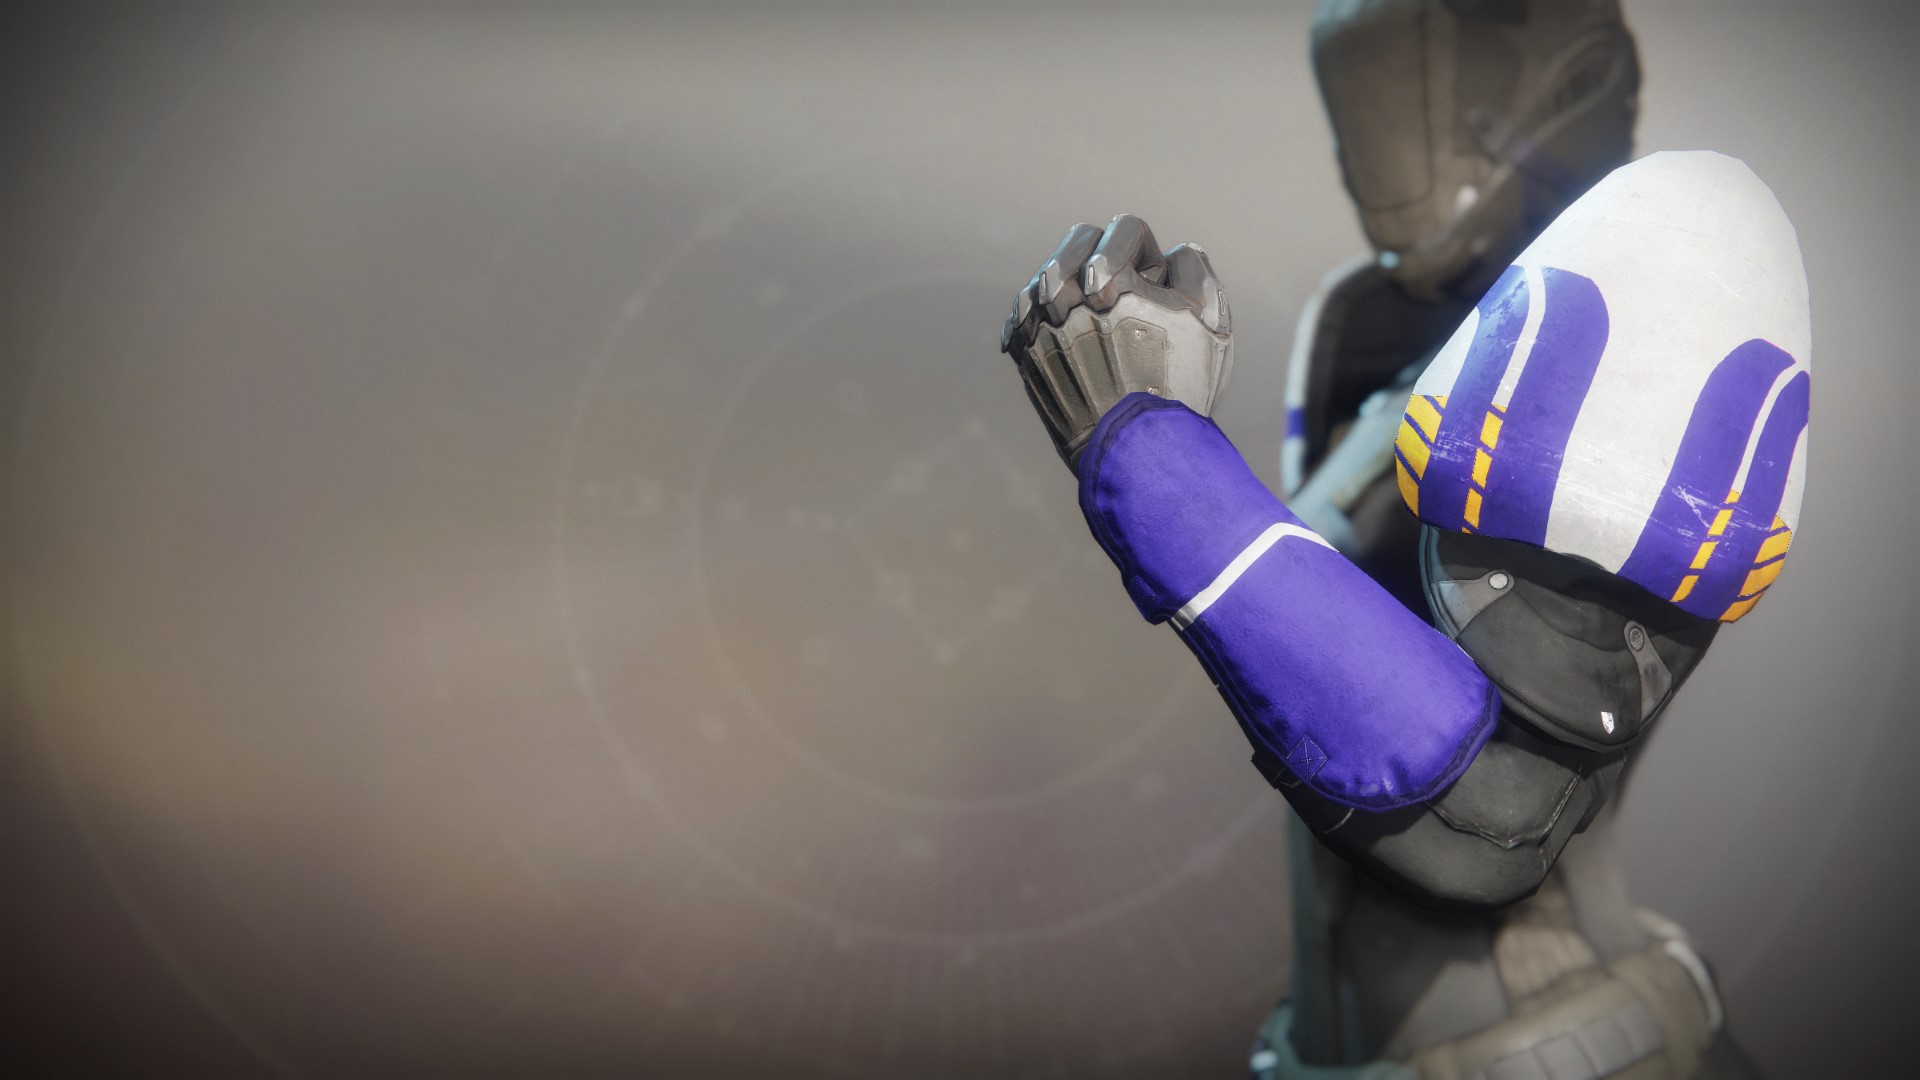 An in-game render of the Superior's Vision Gauntlets.